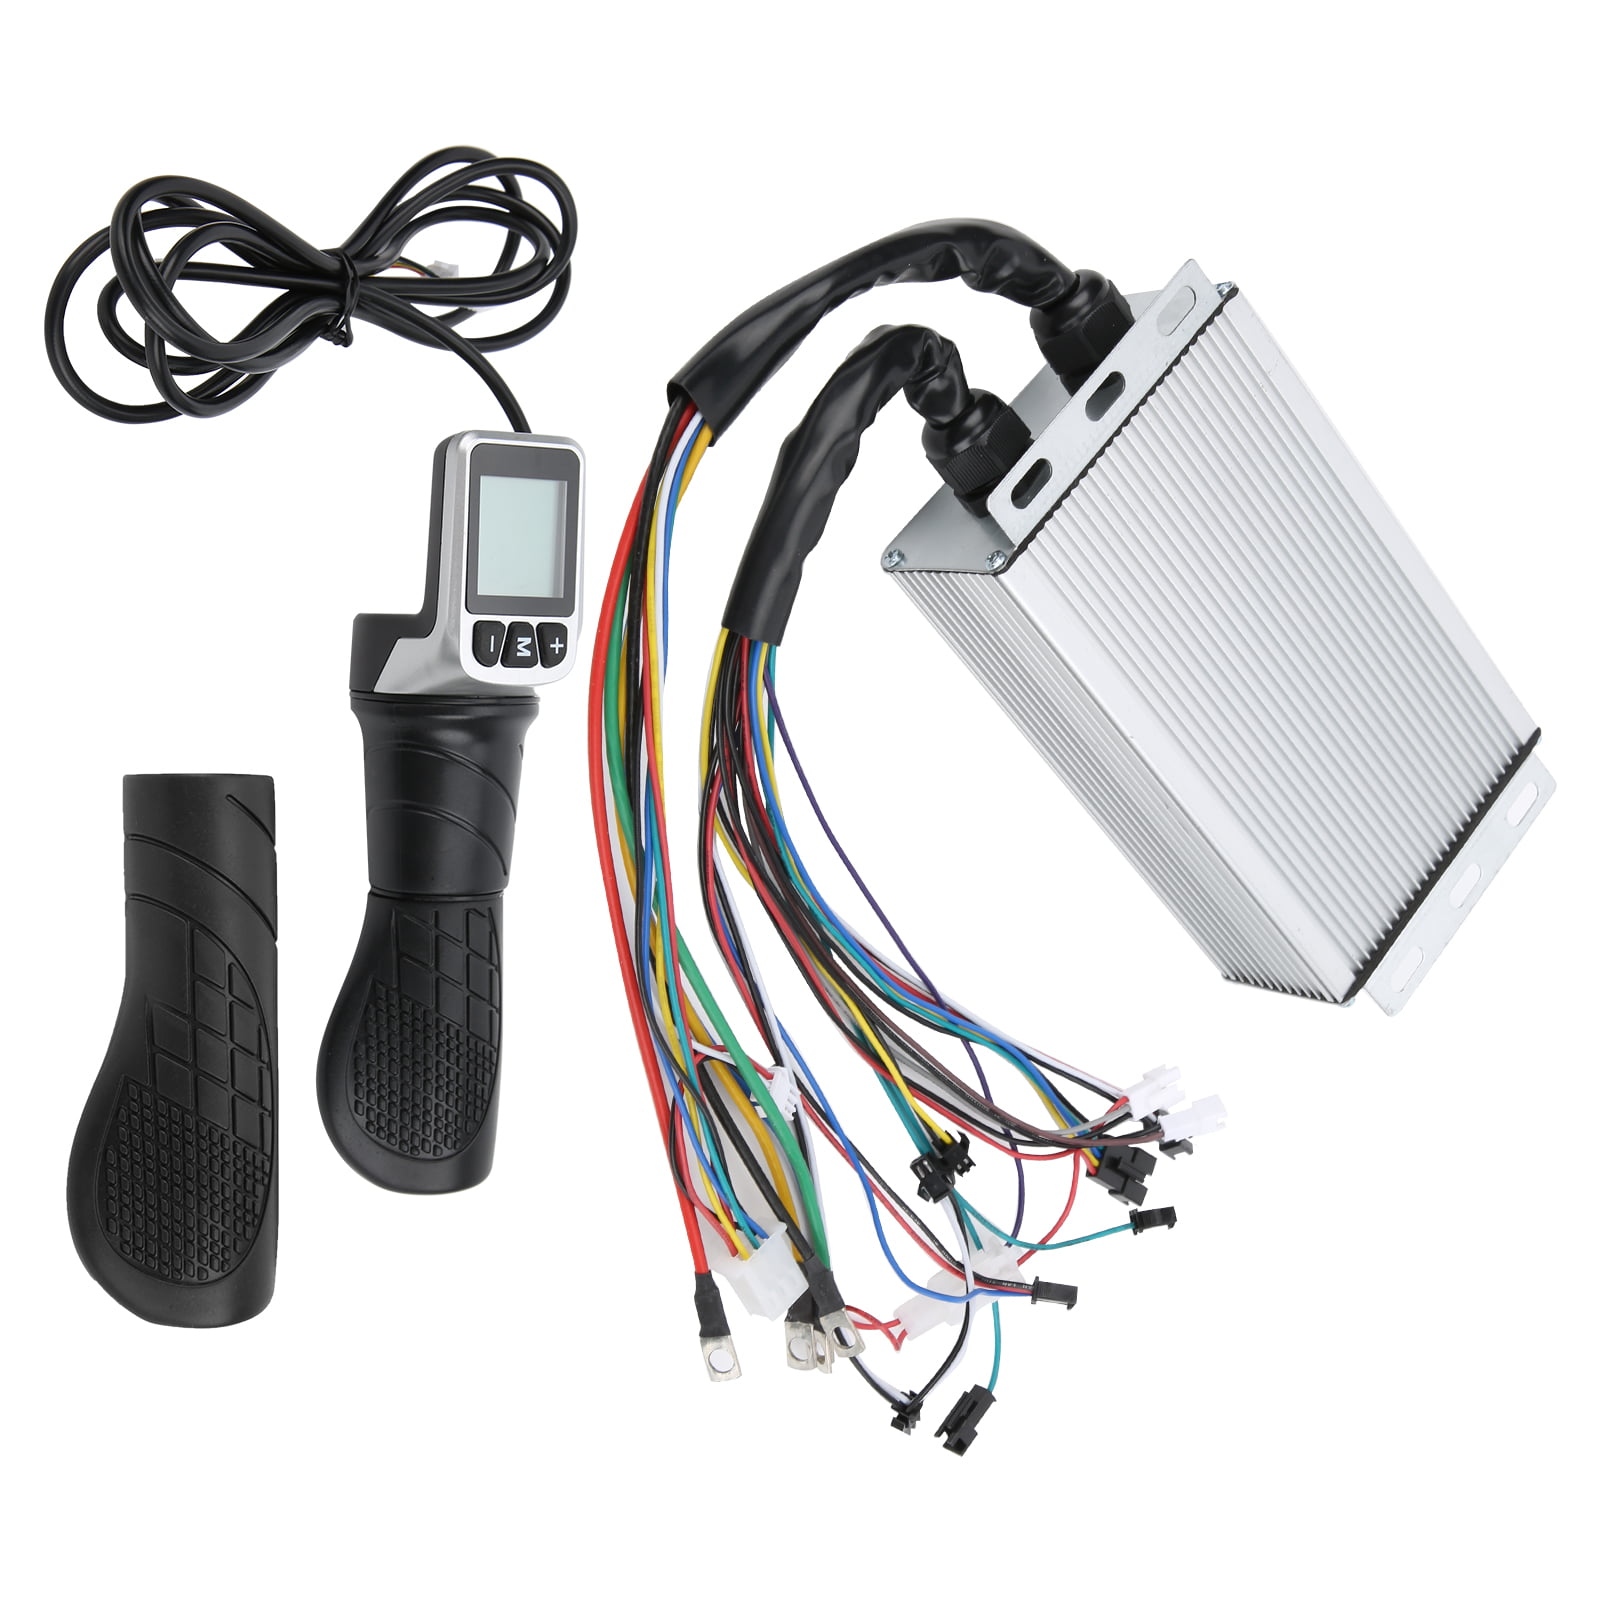 36V 350W Motor Brushless Controller+Throttle Twist Grip For Electric Scooter Sct 